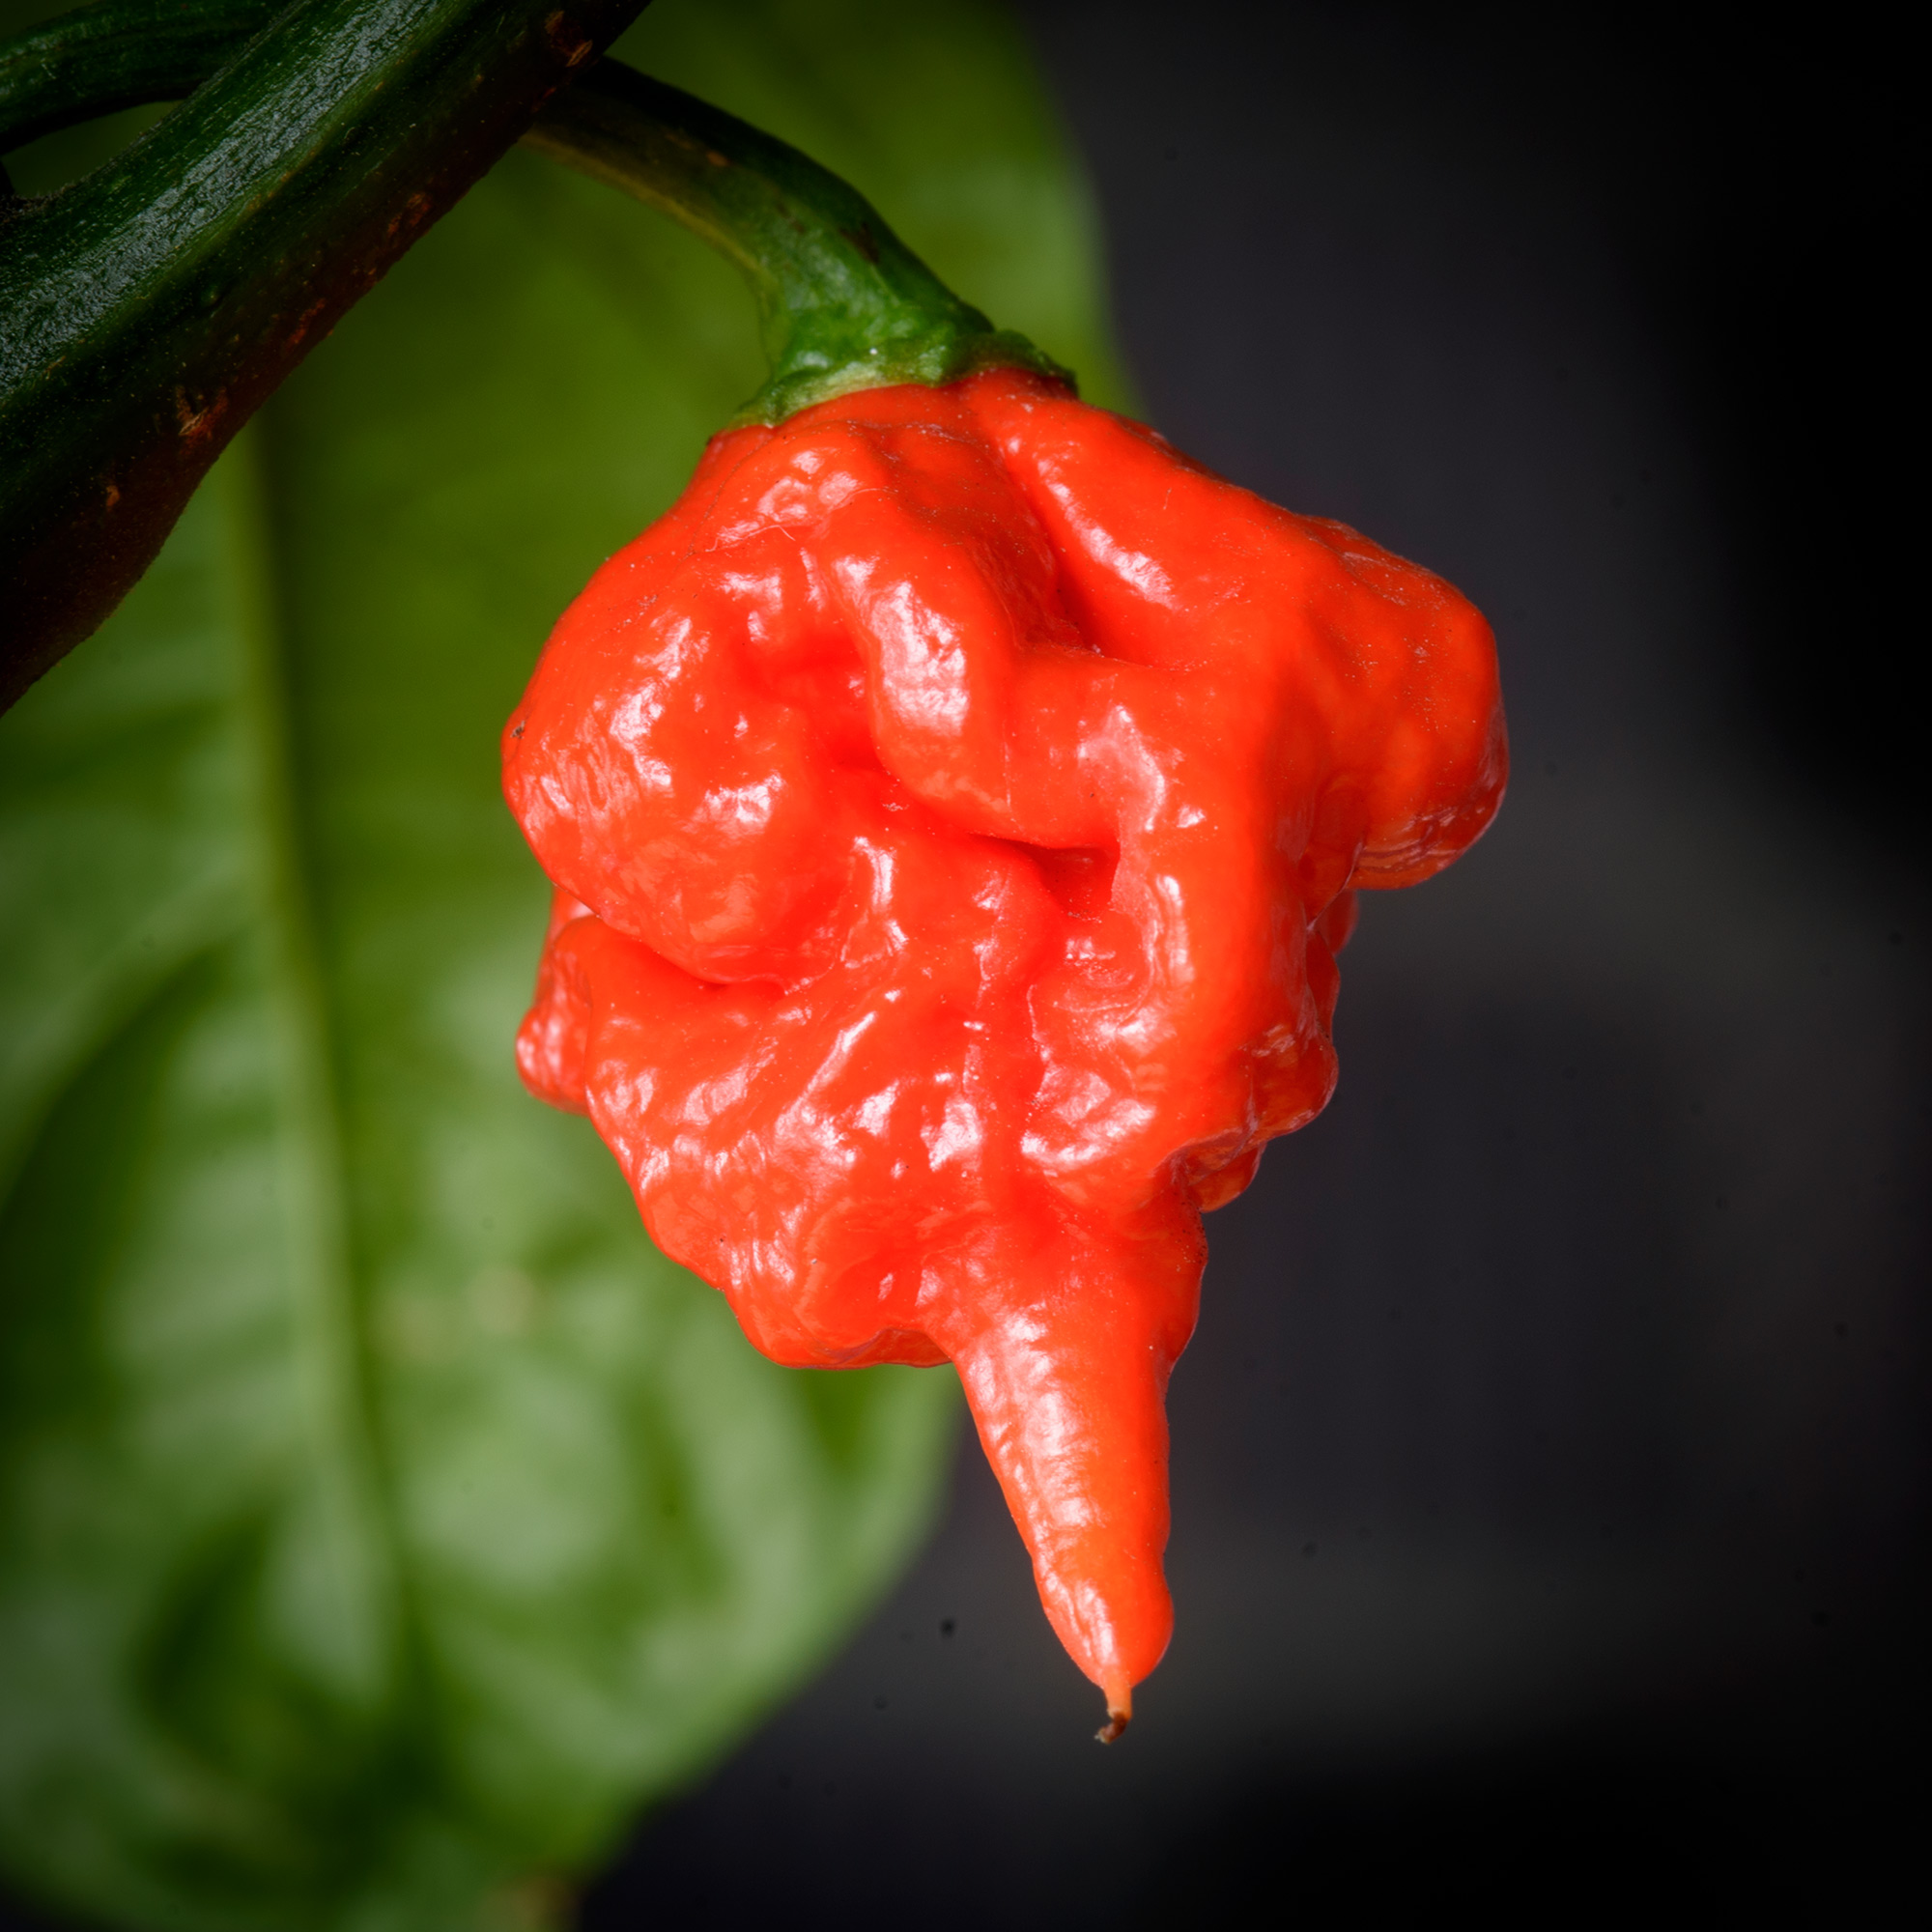 This just has to be Carolina Reaper.